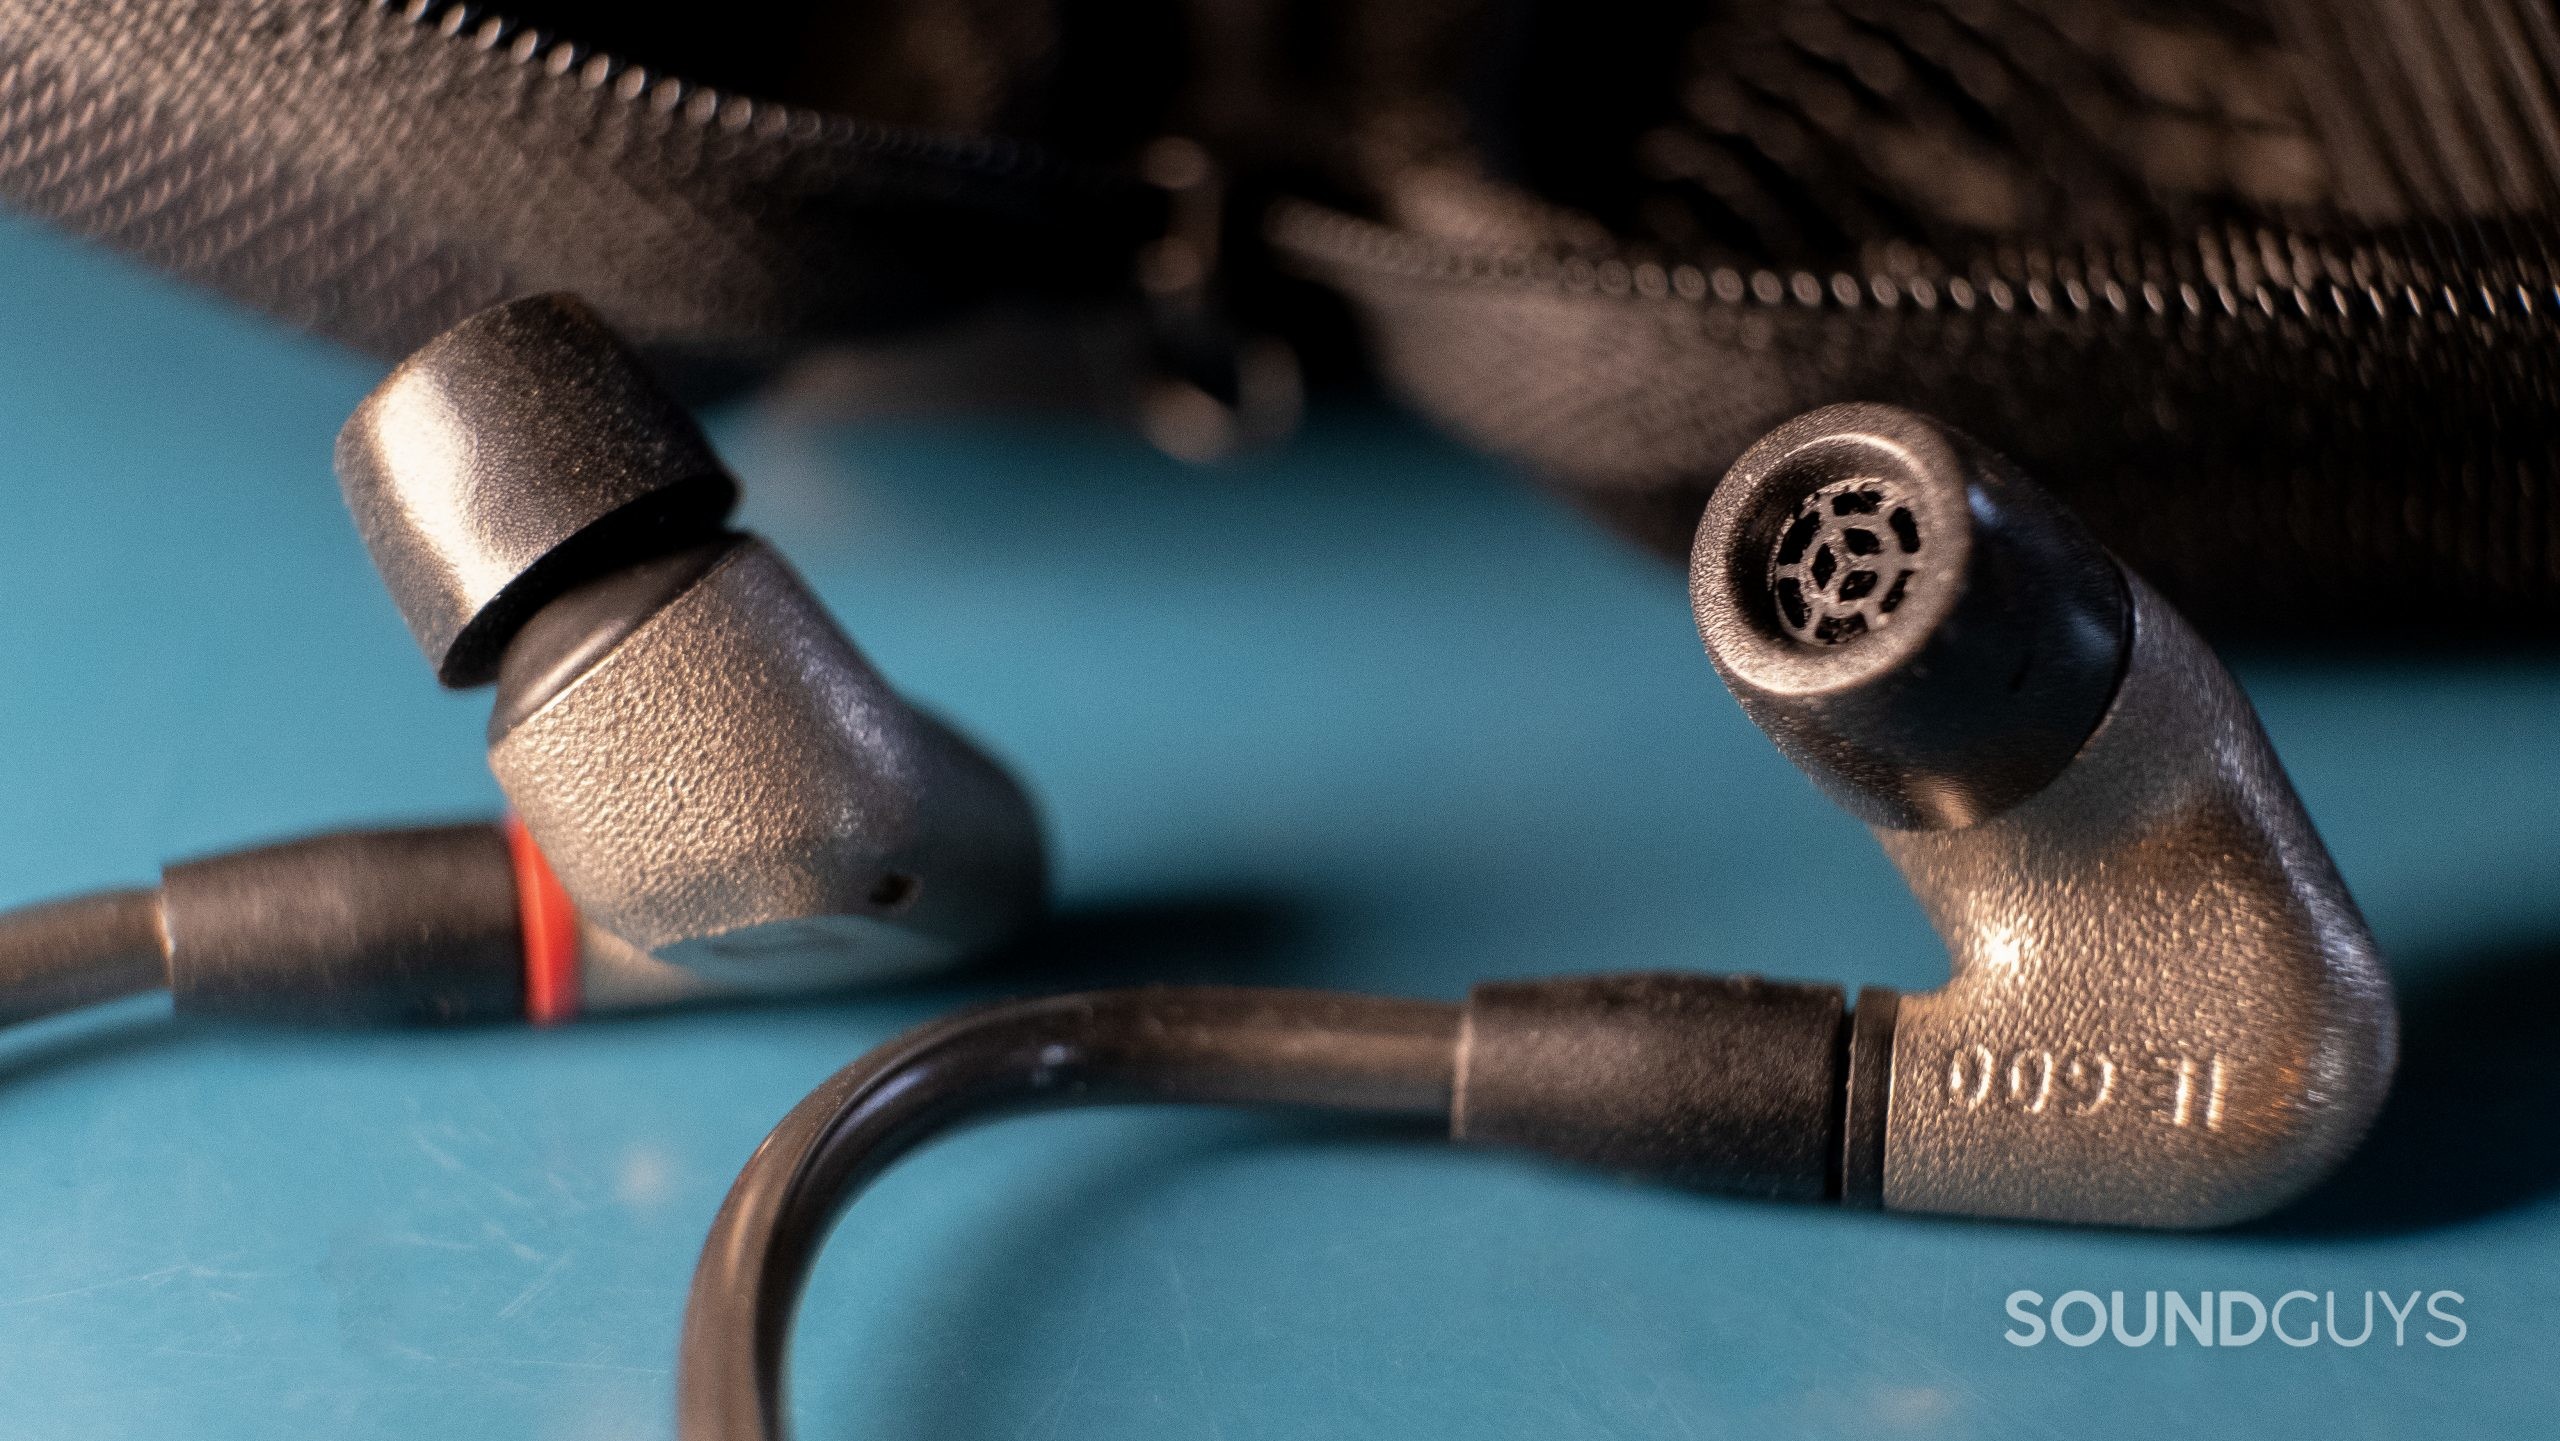 A close up of the IE 600 buds with the foam ear tips.